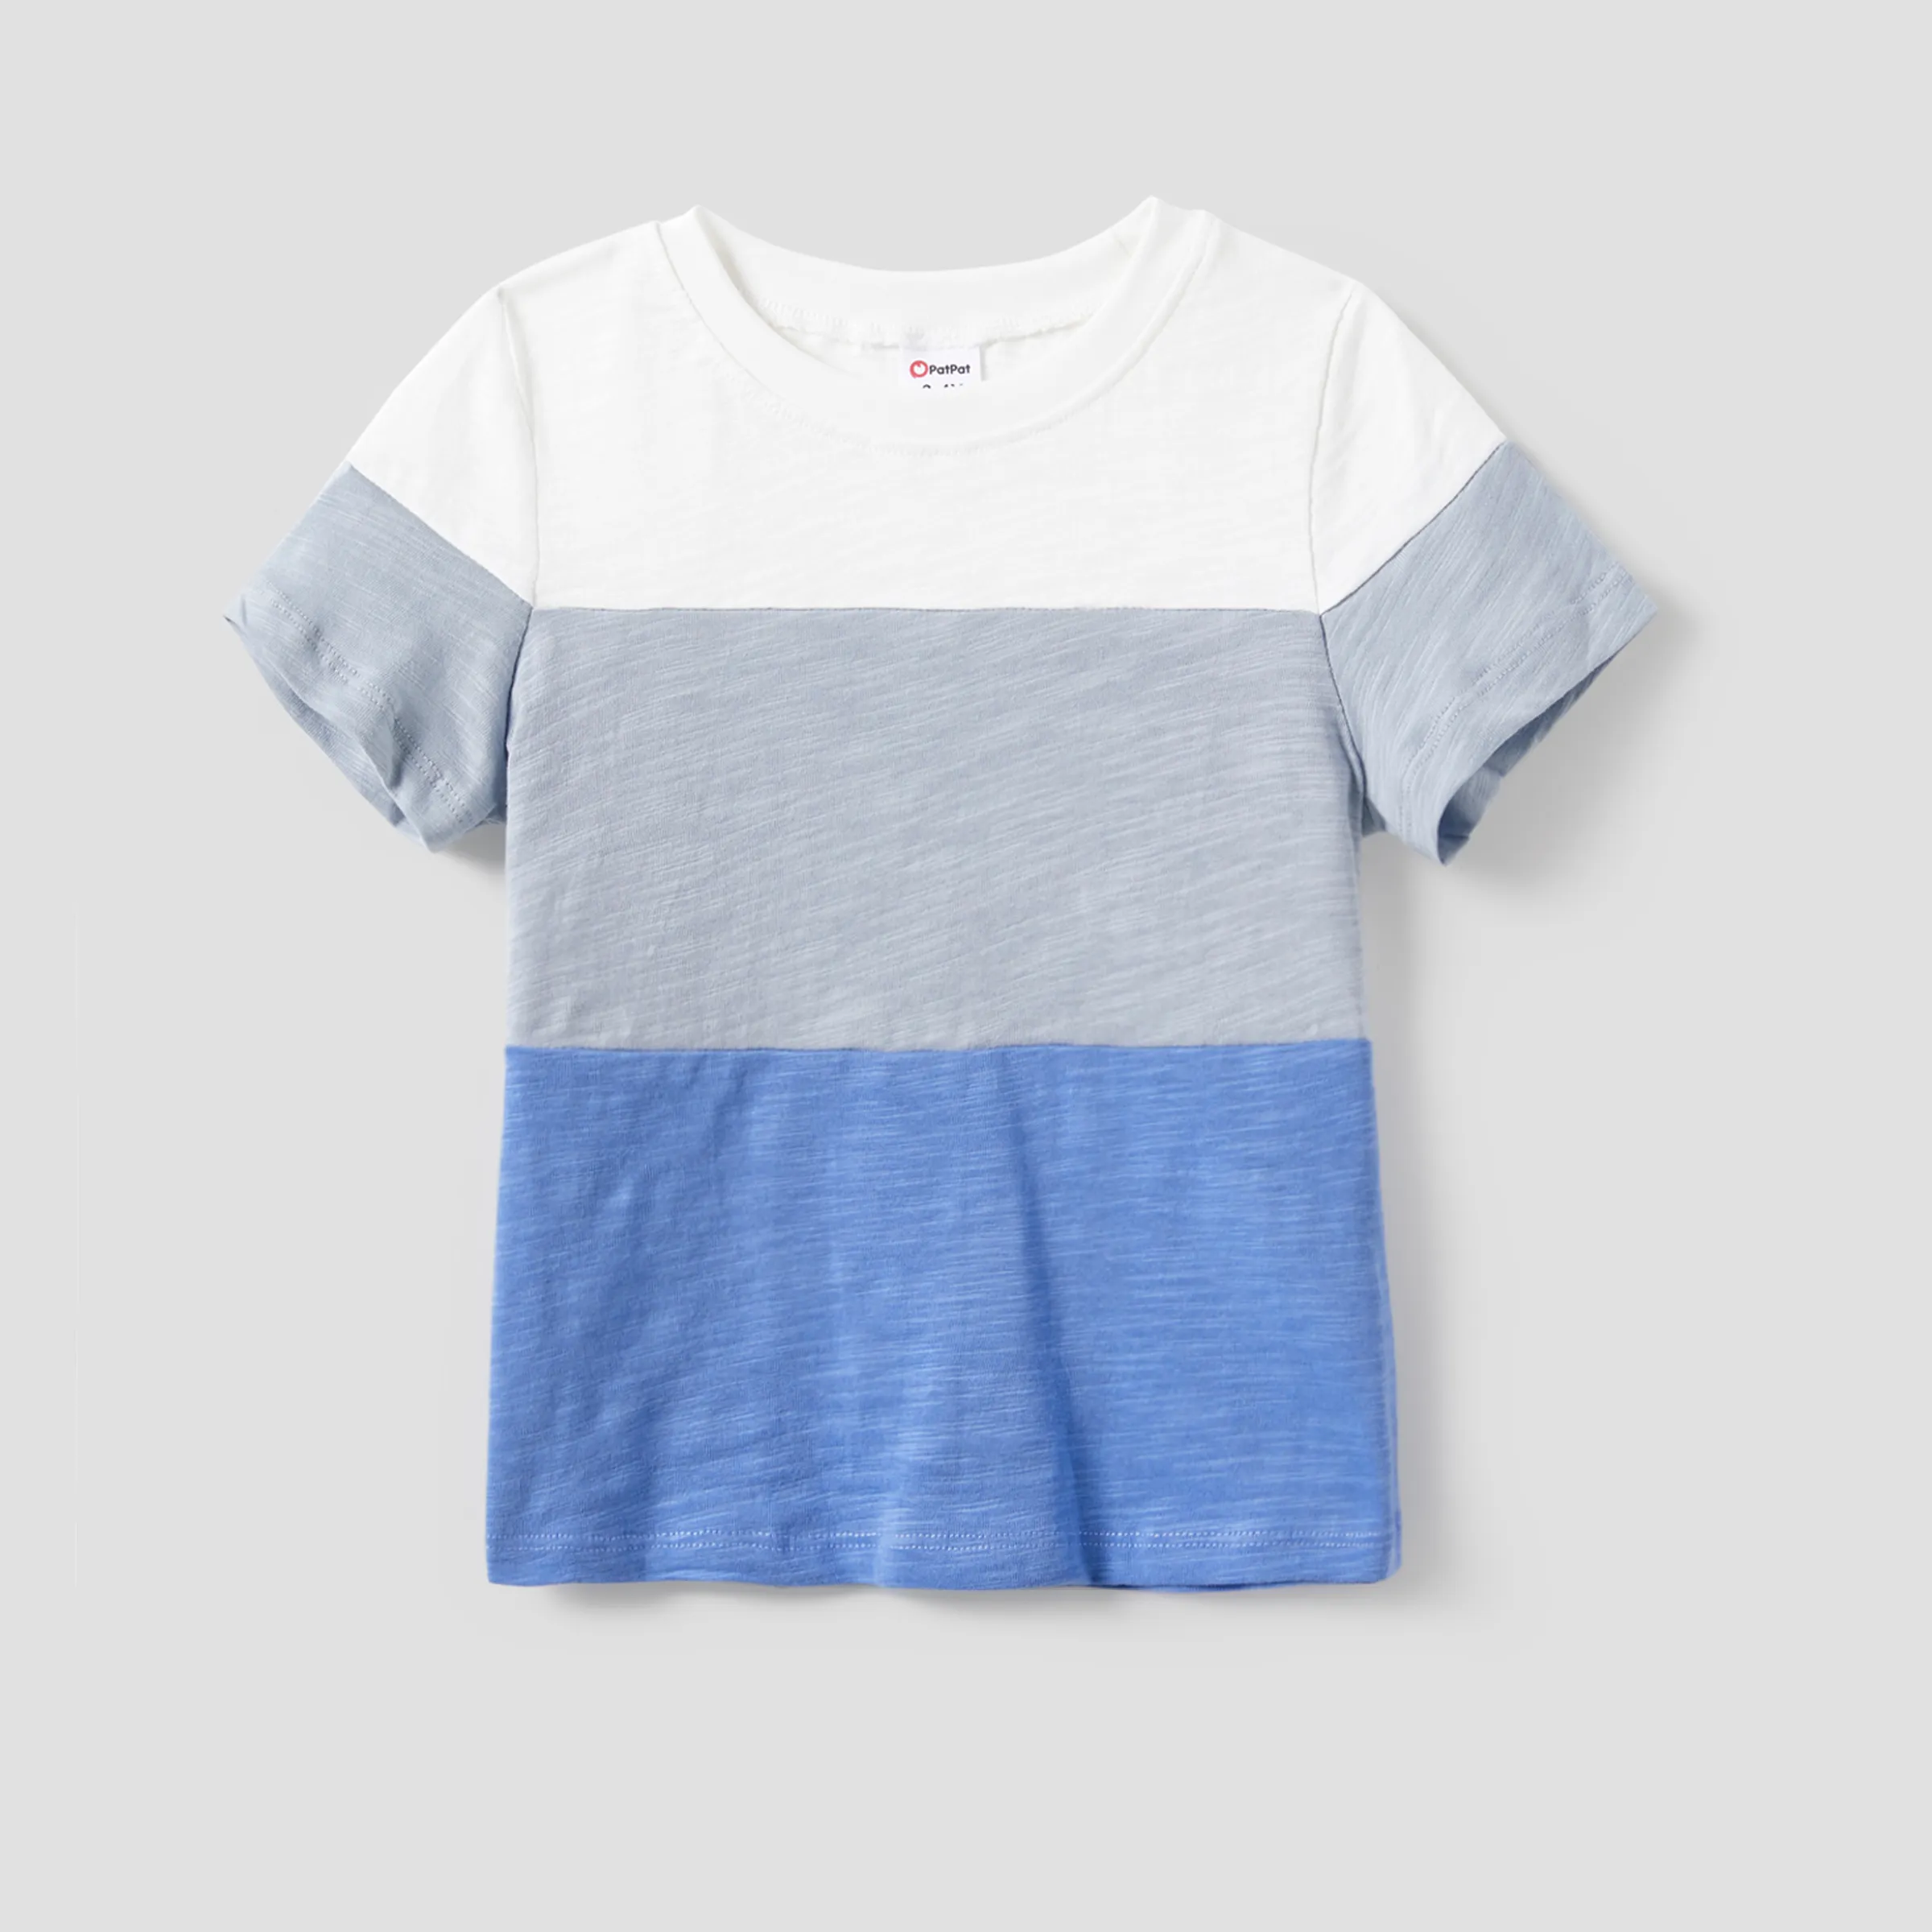 Family Matching Cotton Colorblock Tee And Tank A-line Dress With Drawstring, Pockets And Buttons Sets